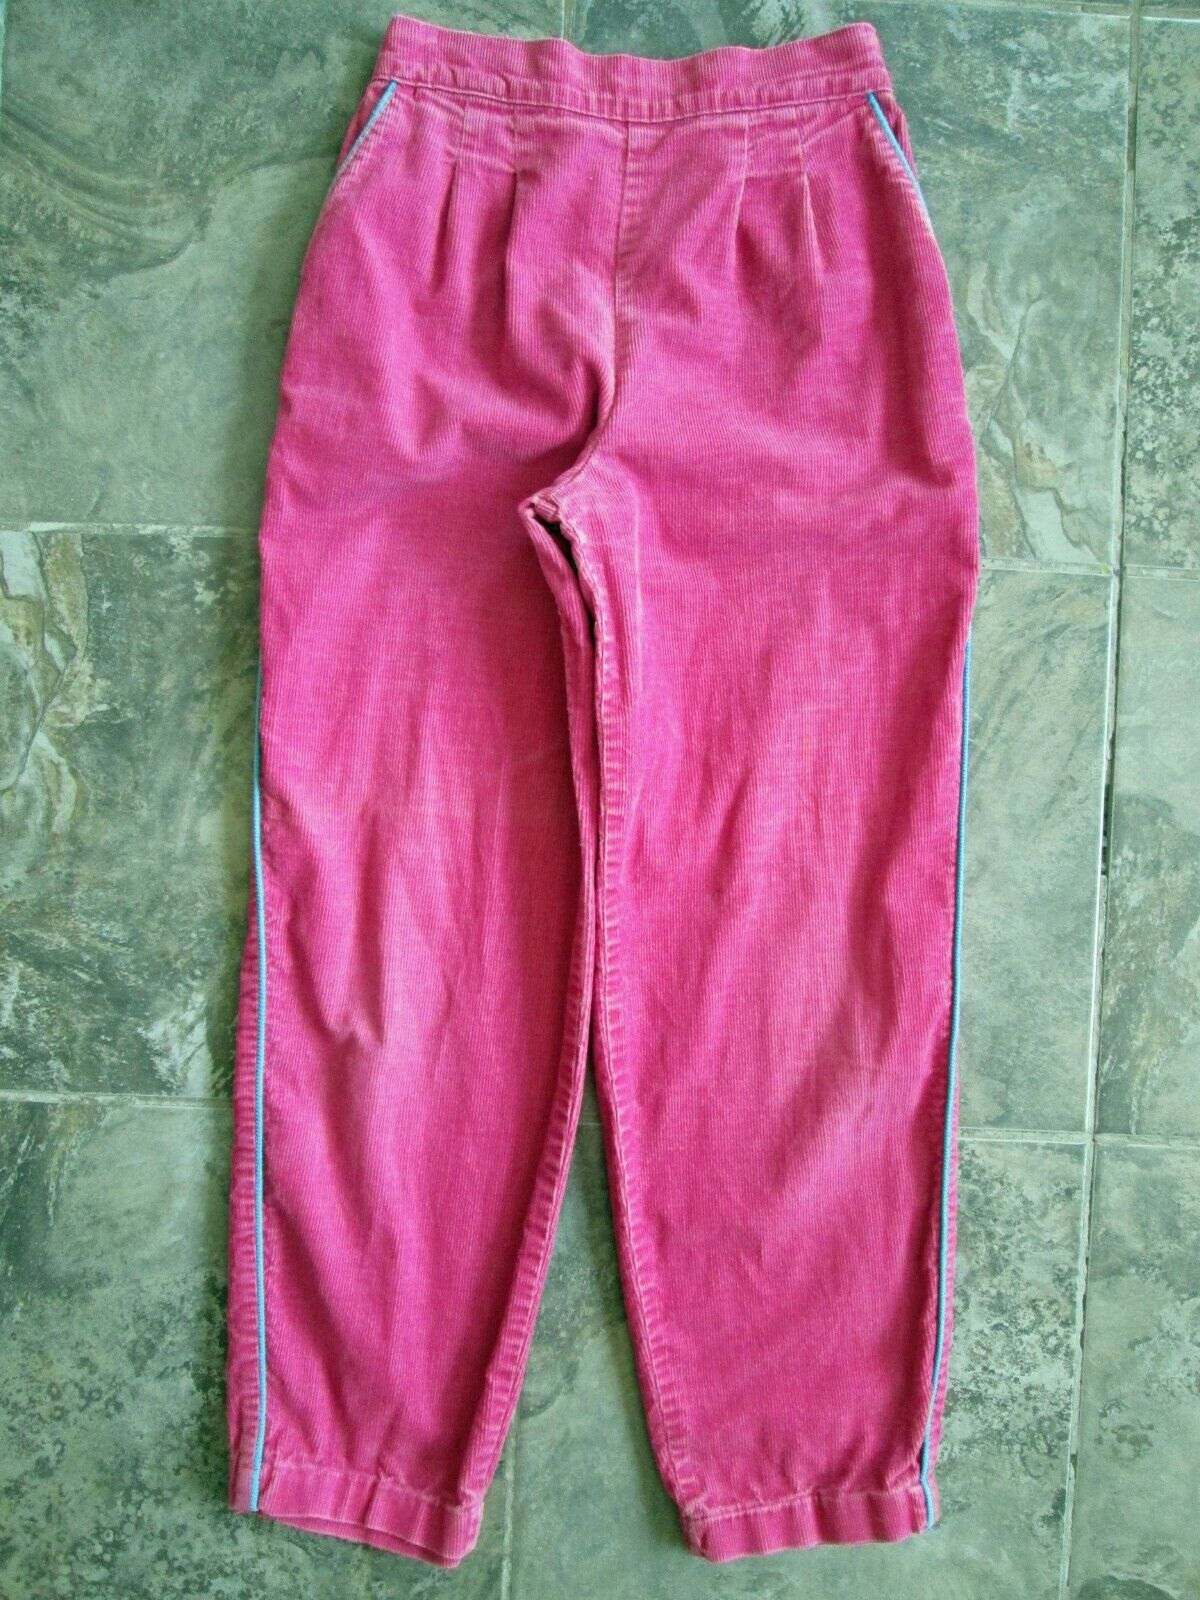 Vintage Levi's Pants +/- 26x25 Ankle Pink Corduroy Cotton Tapered Leg Full Mom